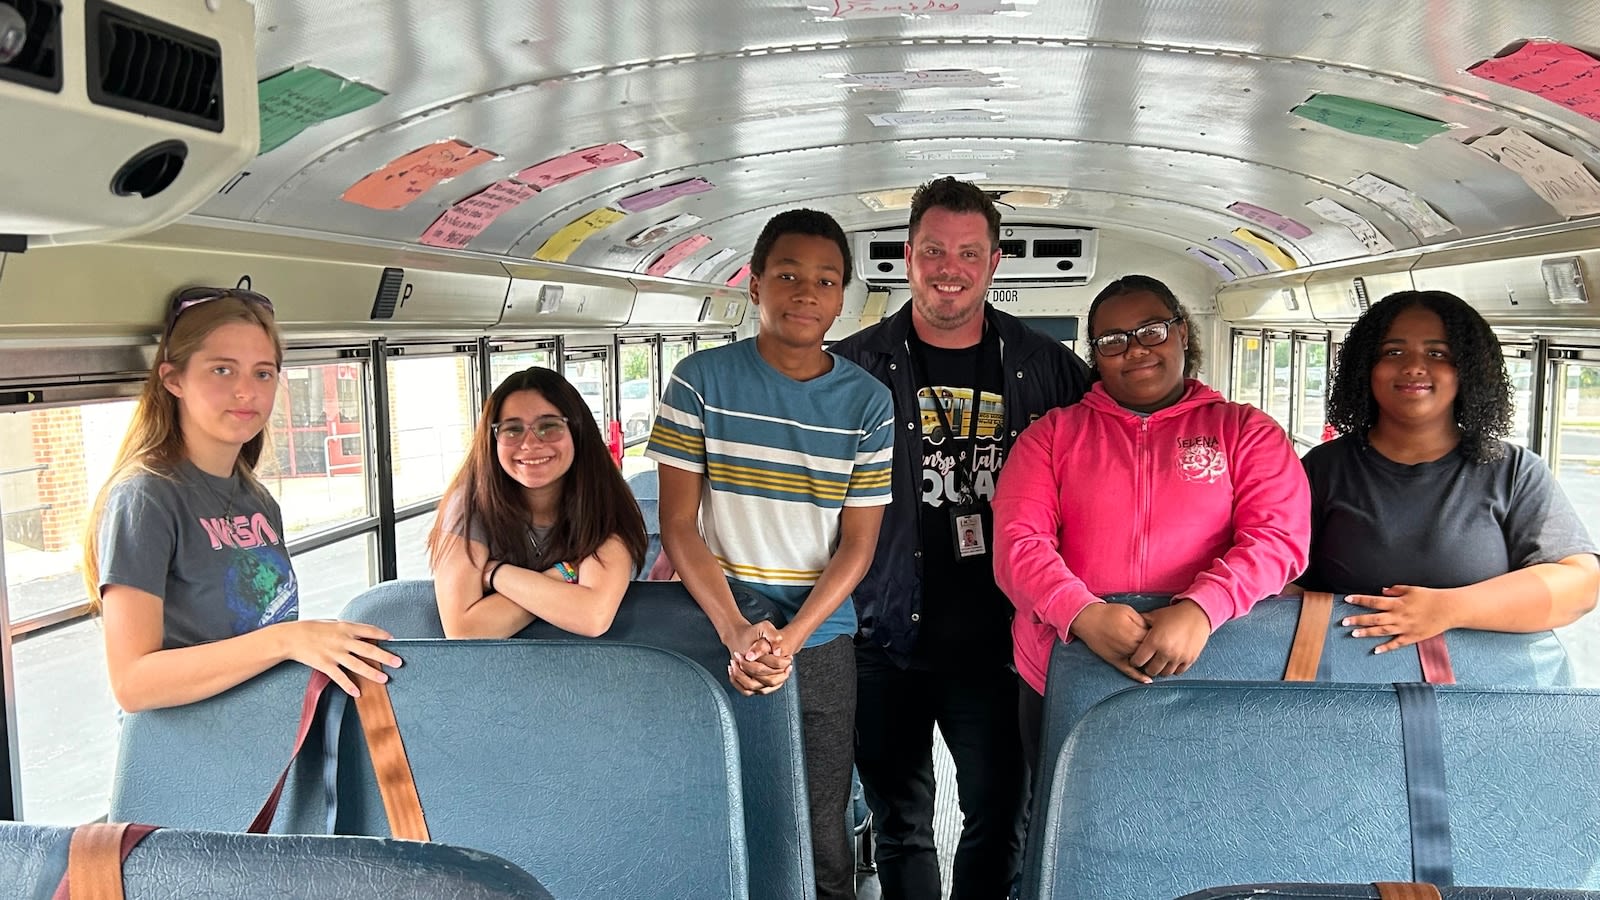 School bus driver on a mission to spread positivity to students